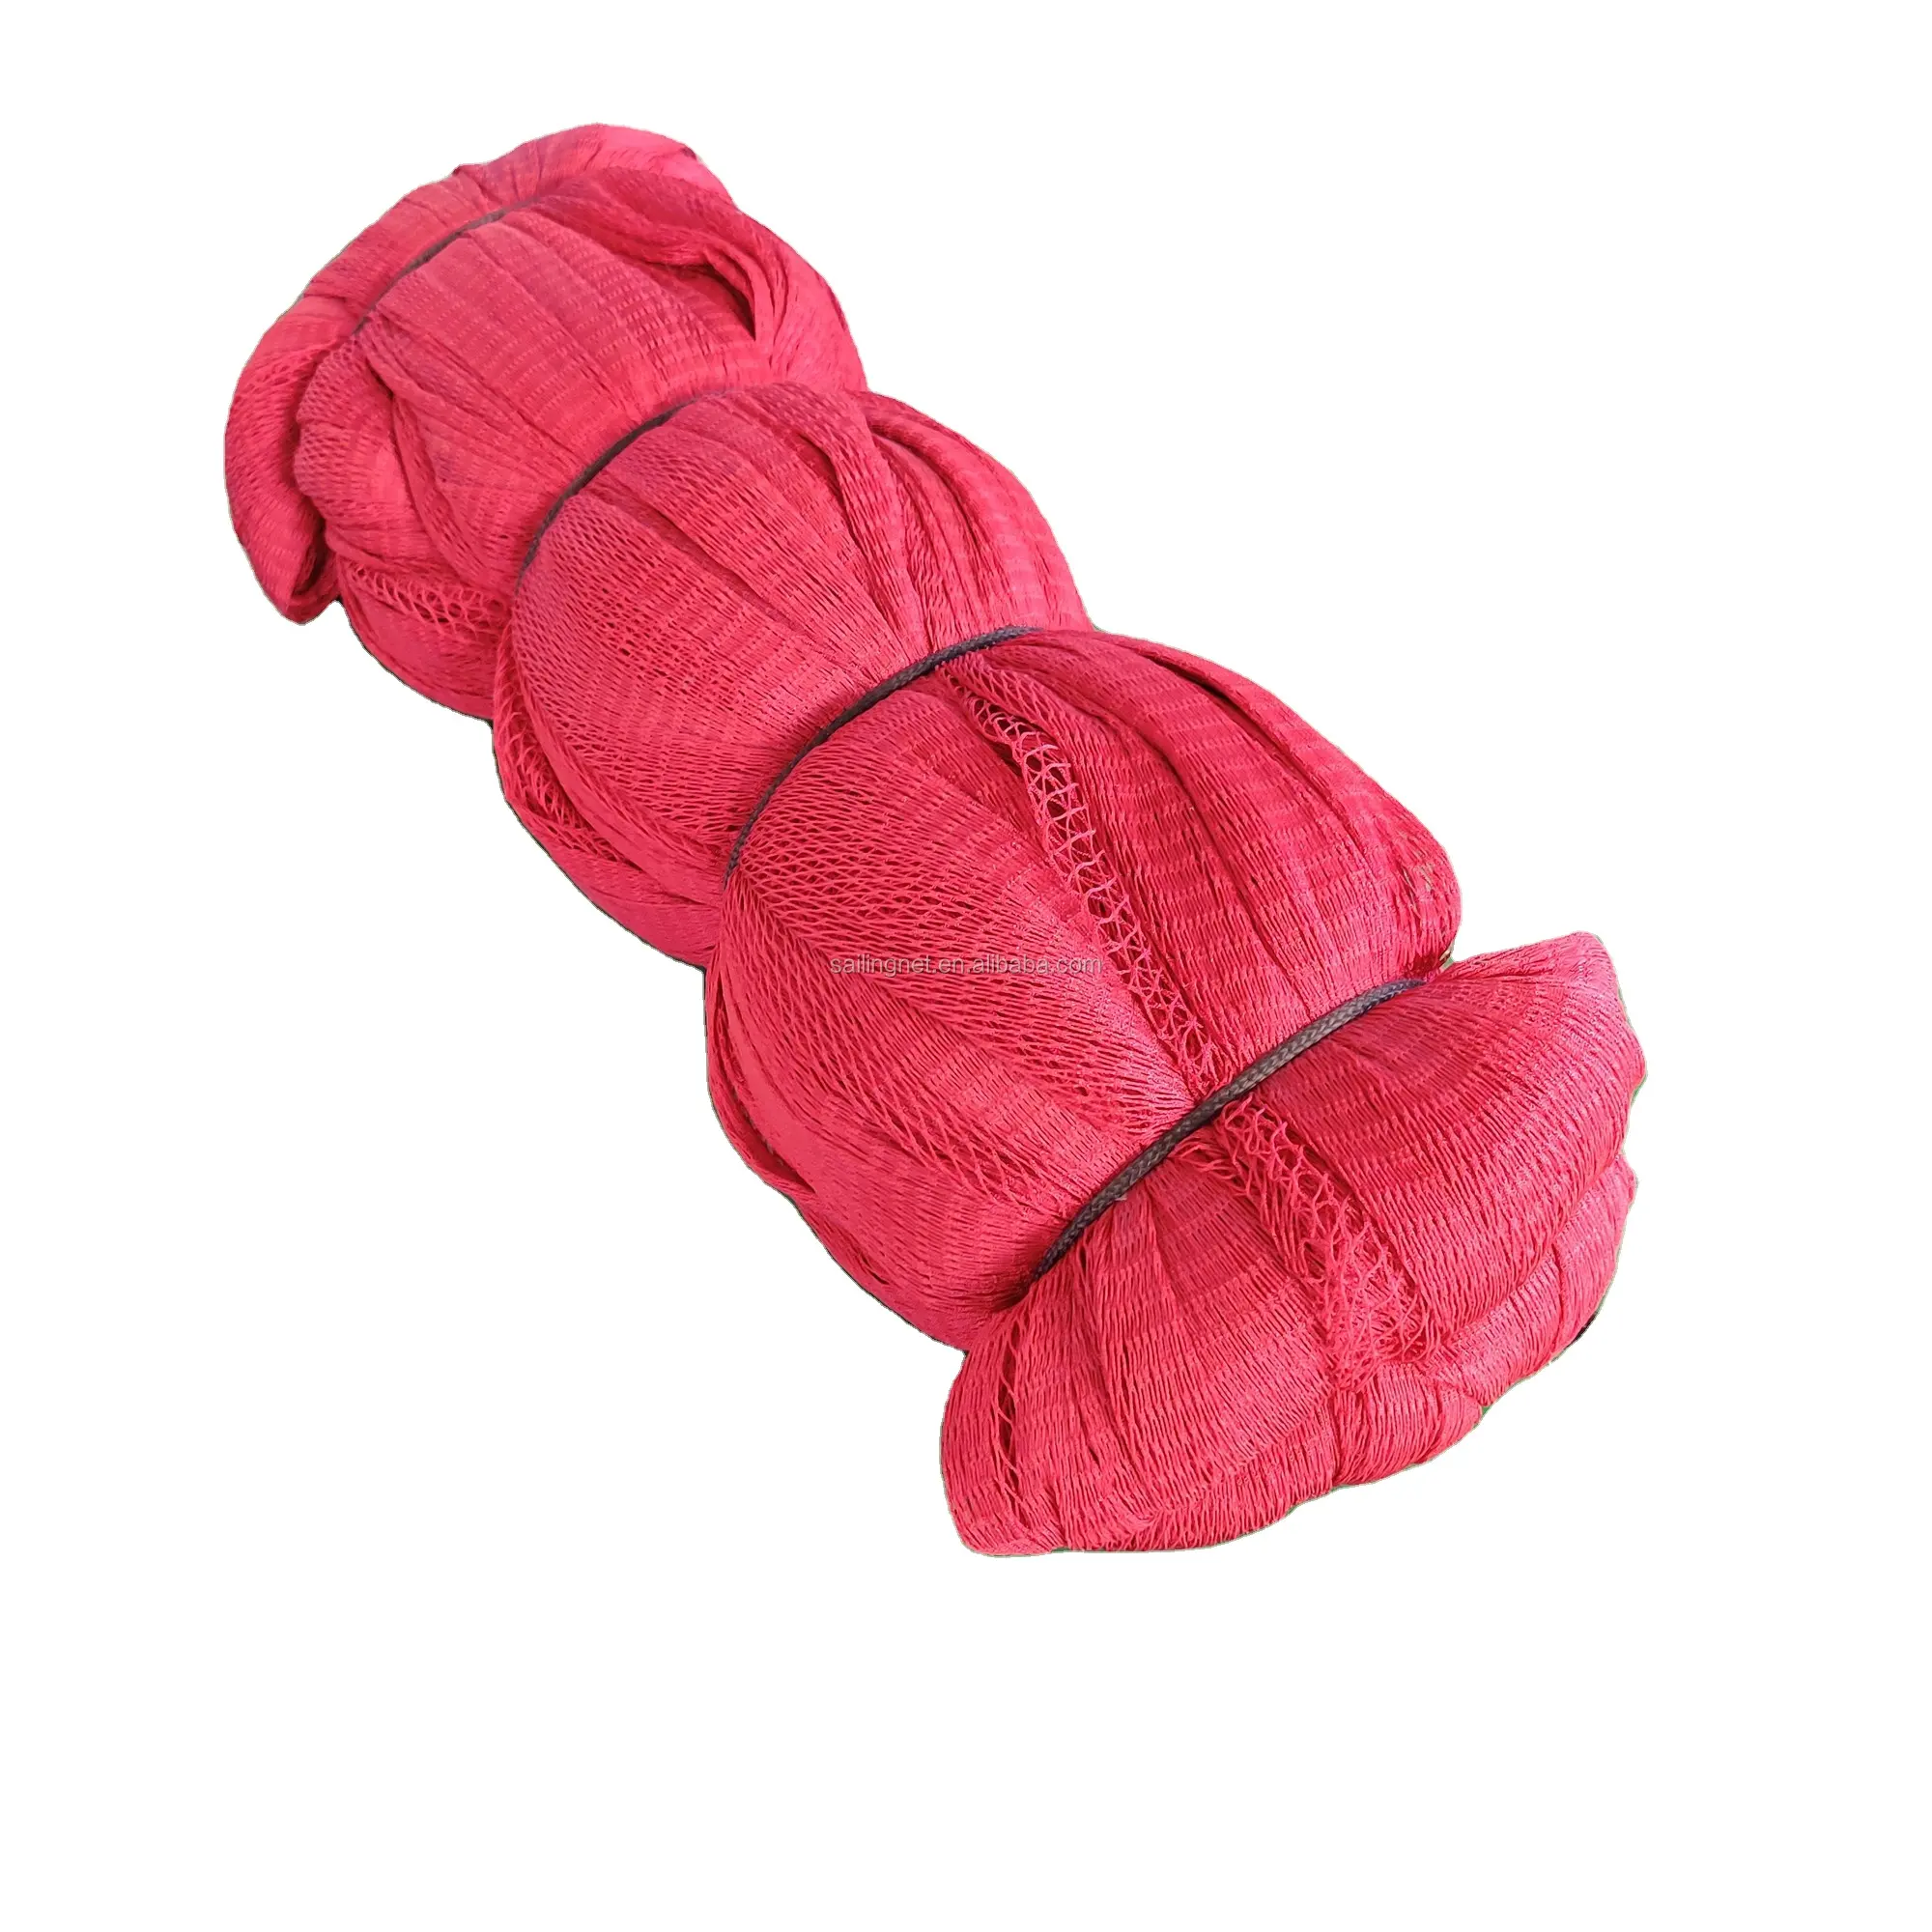 Best Seller Good Elasticity High Quality Nylon or Polyester Braided Knotted pheasant netting Fishing Net